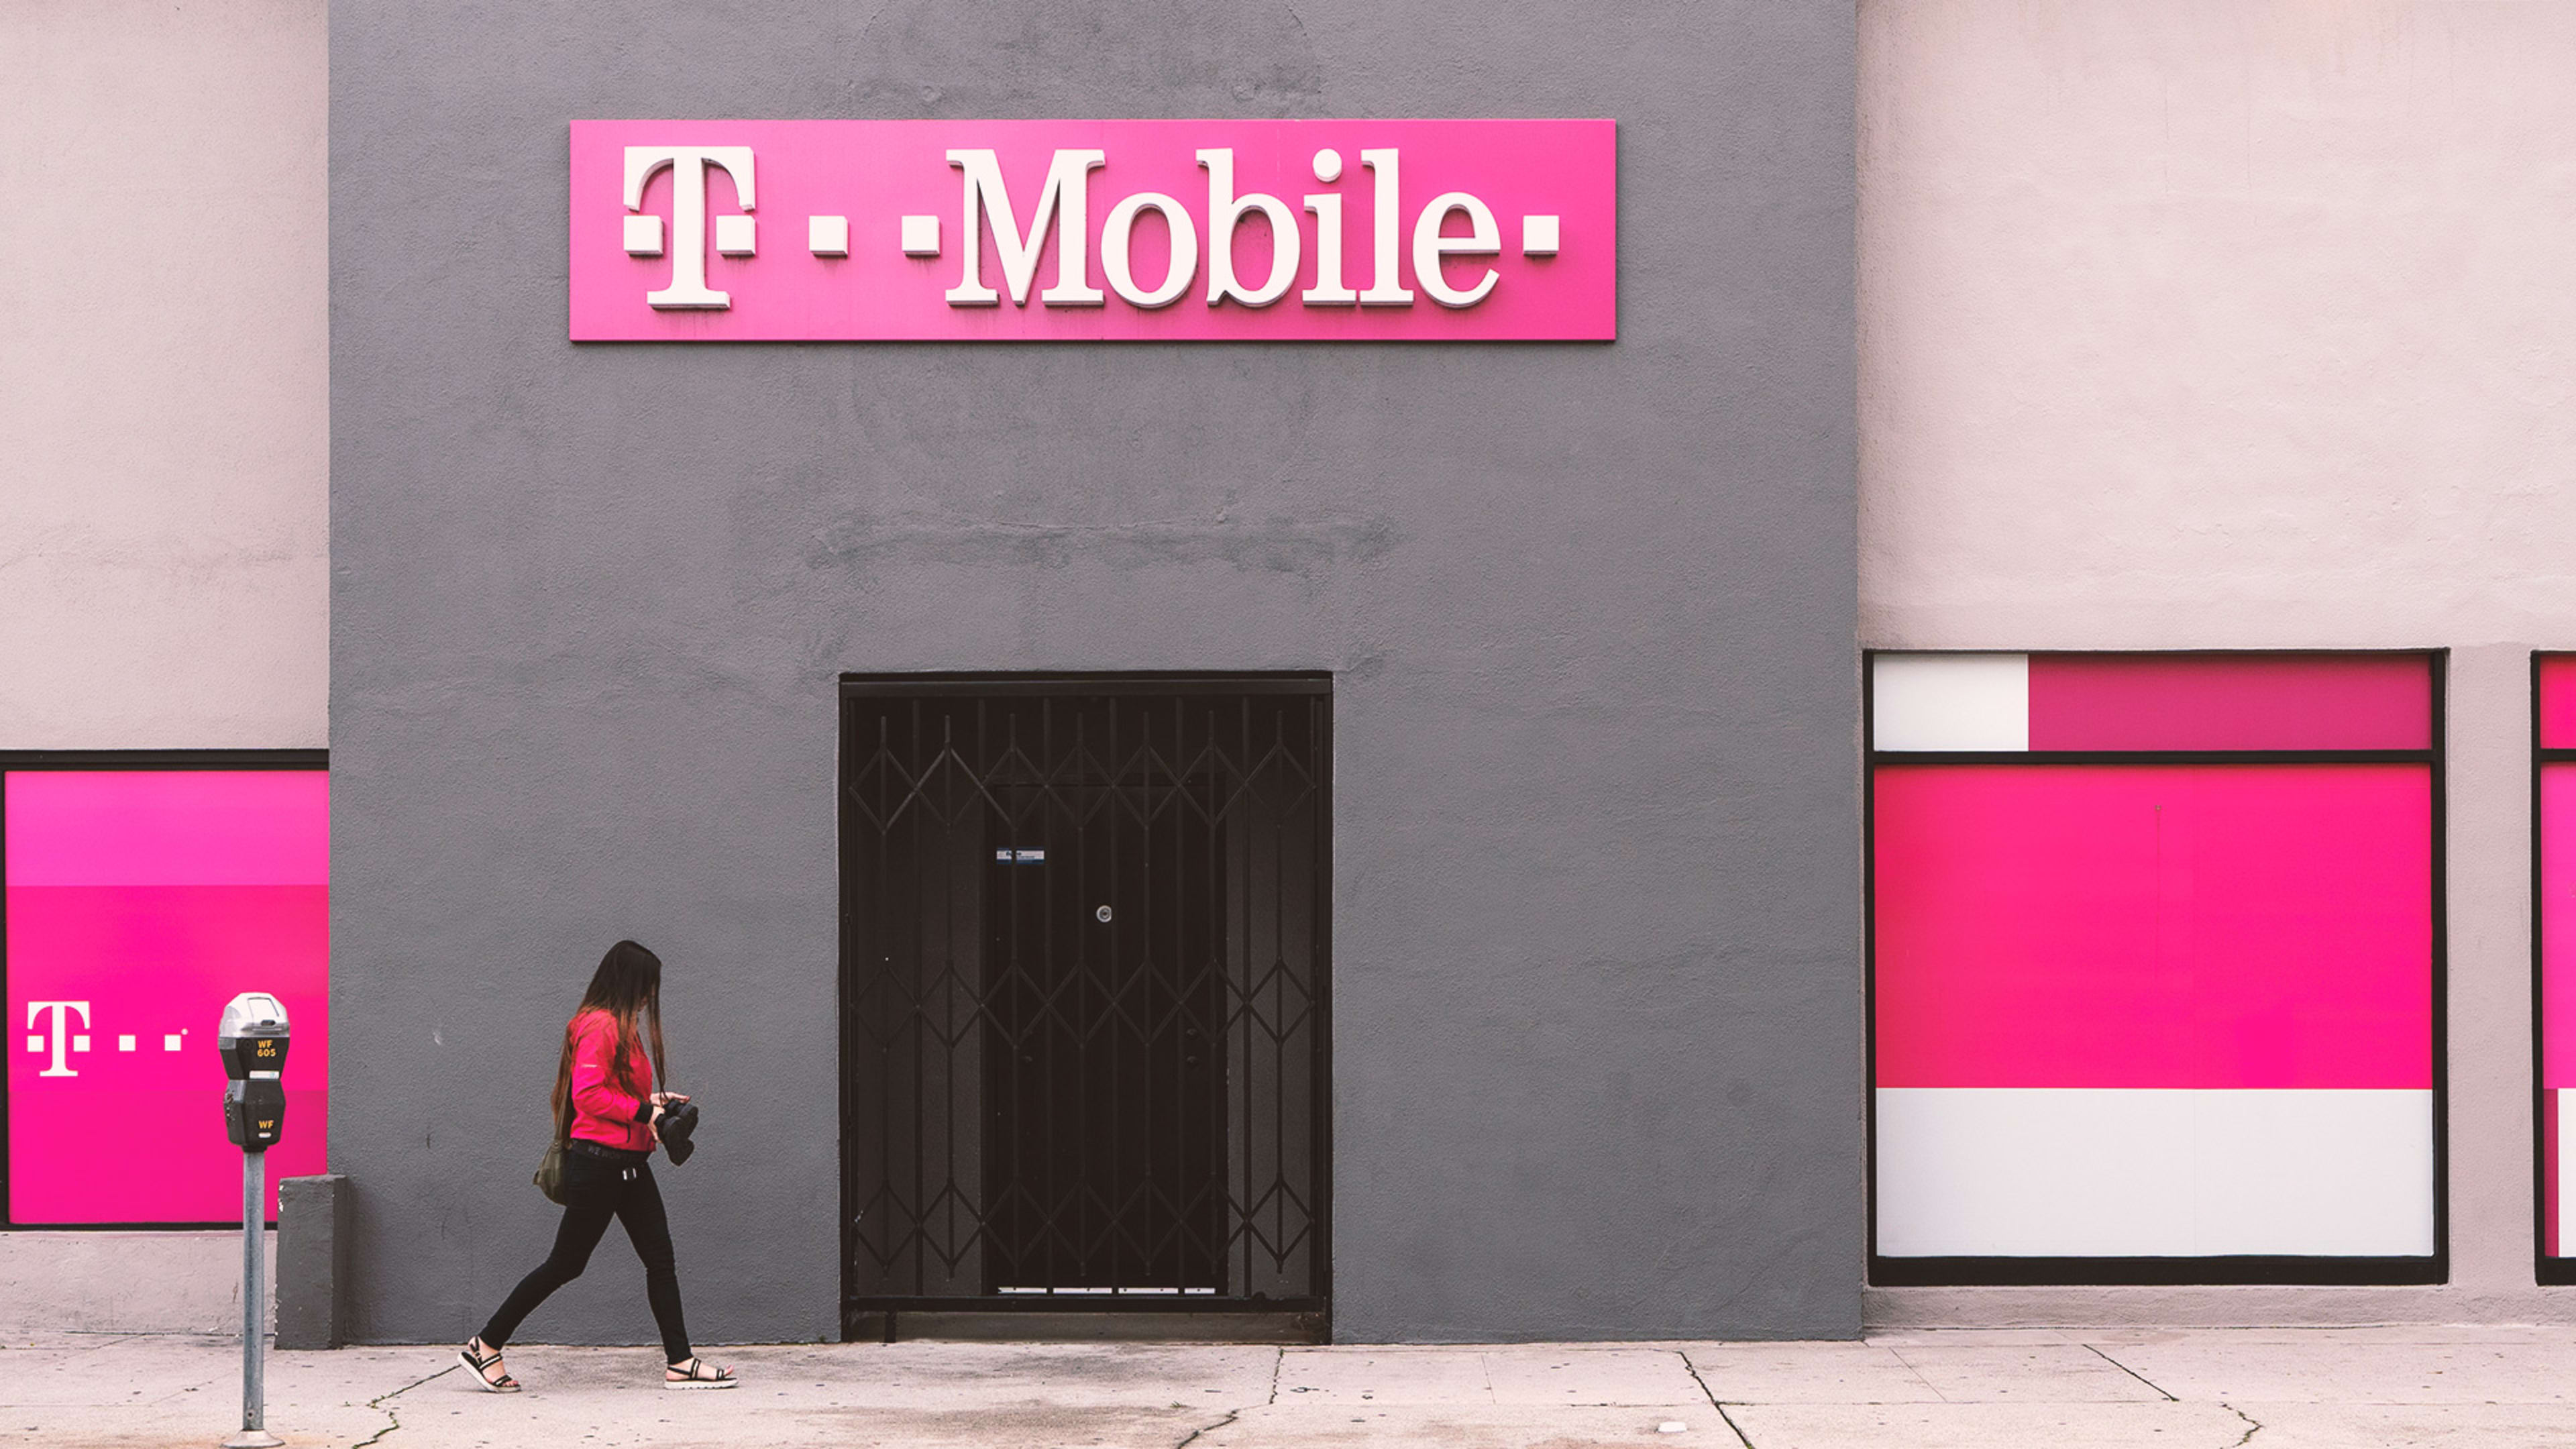 The Sprint/T-Mobile merger was just blessed by the DOJ, but lawsuits remain